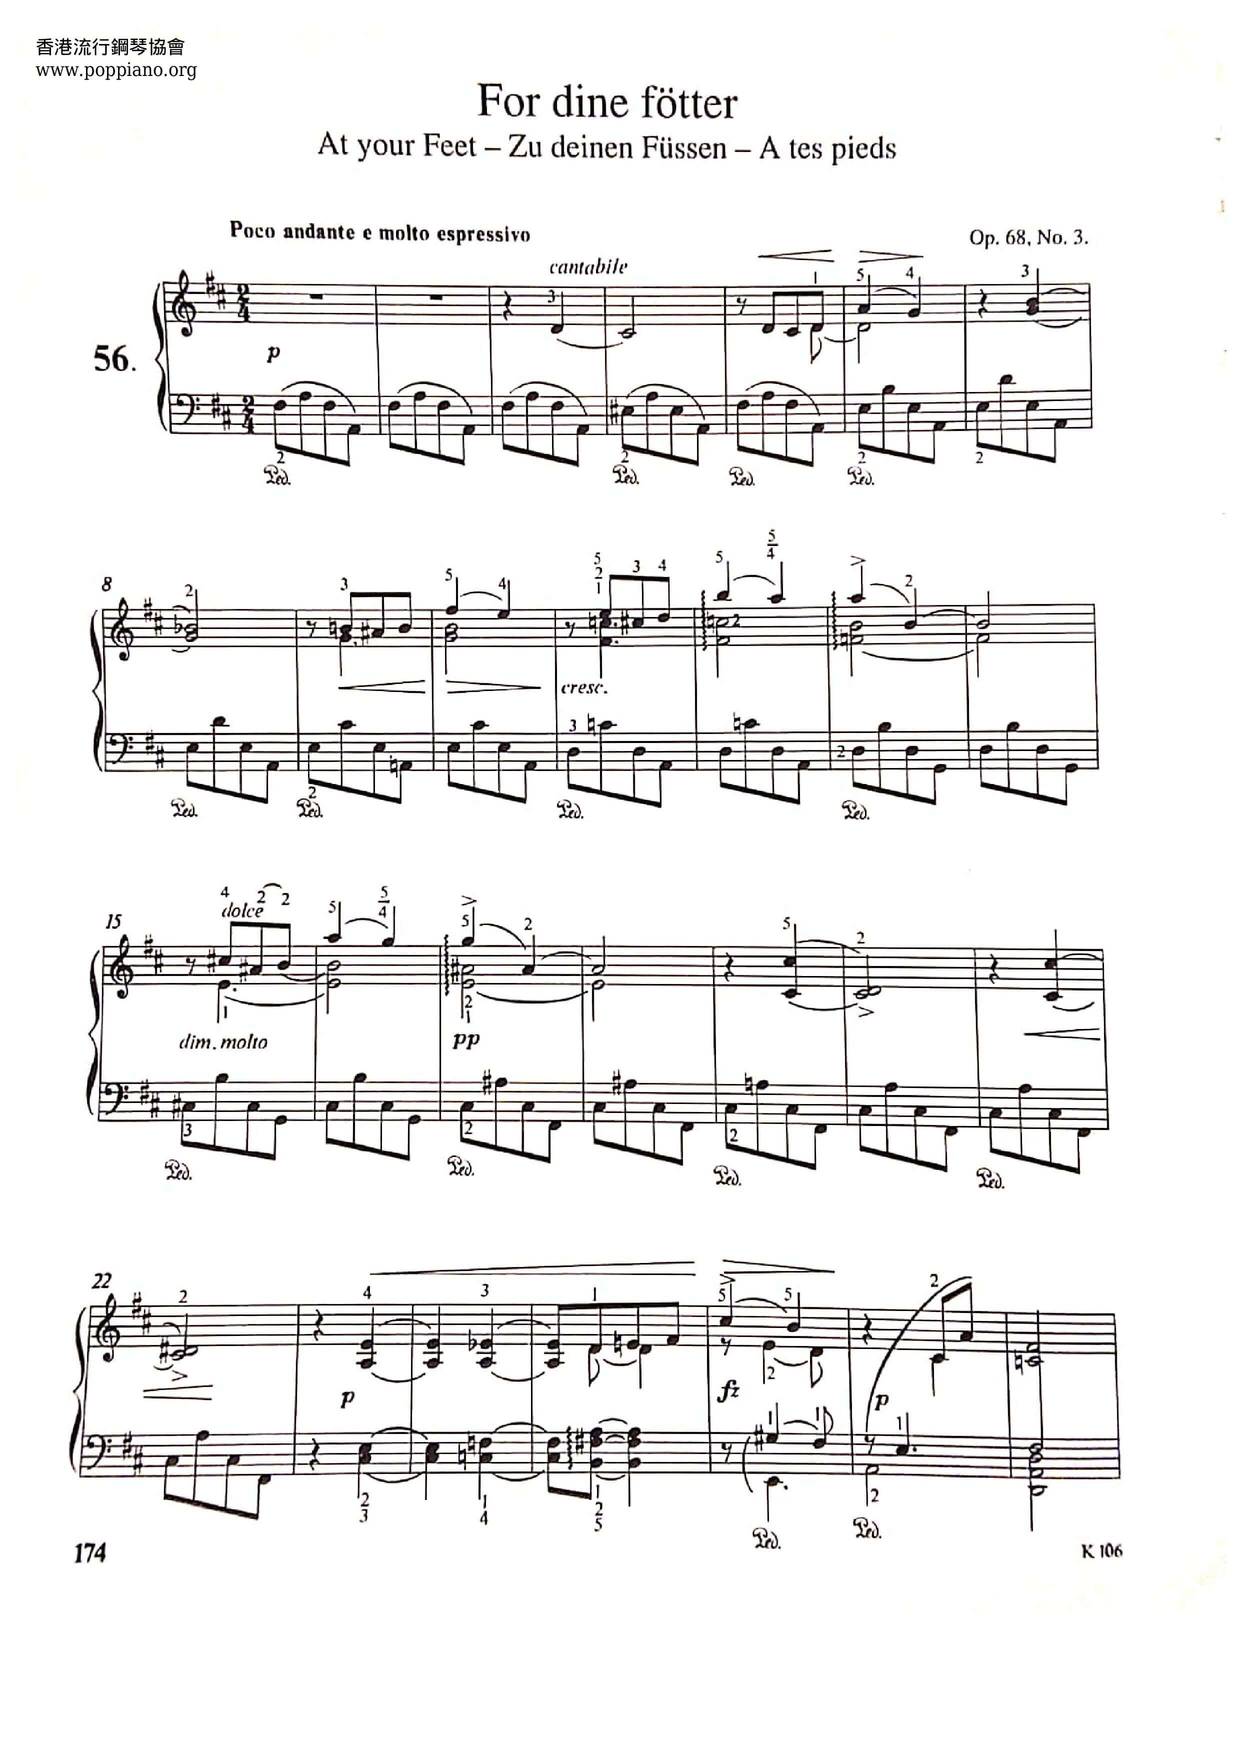 At Your Feet, Op.68 No.3ピアノ譜